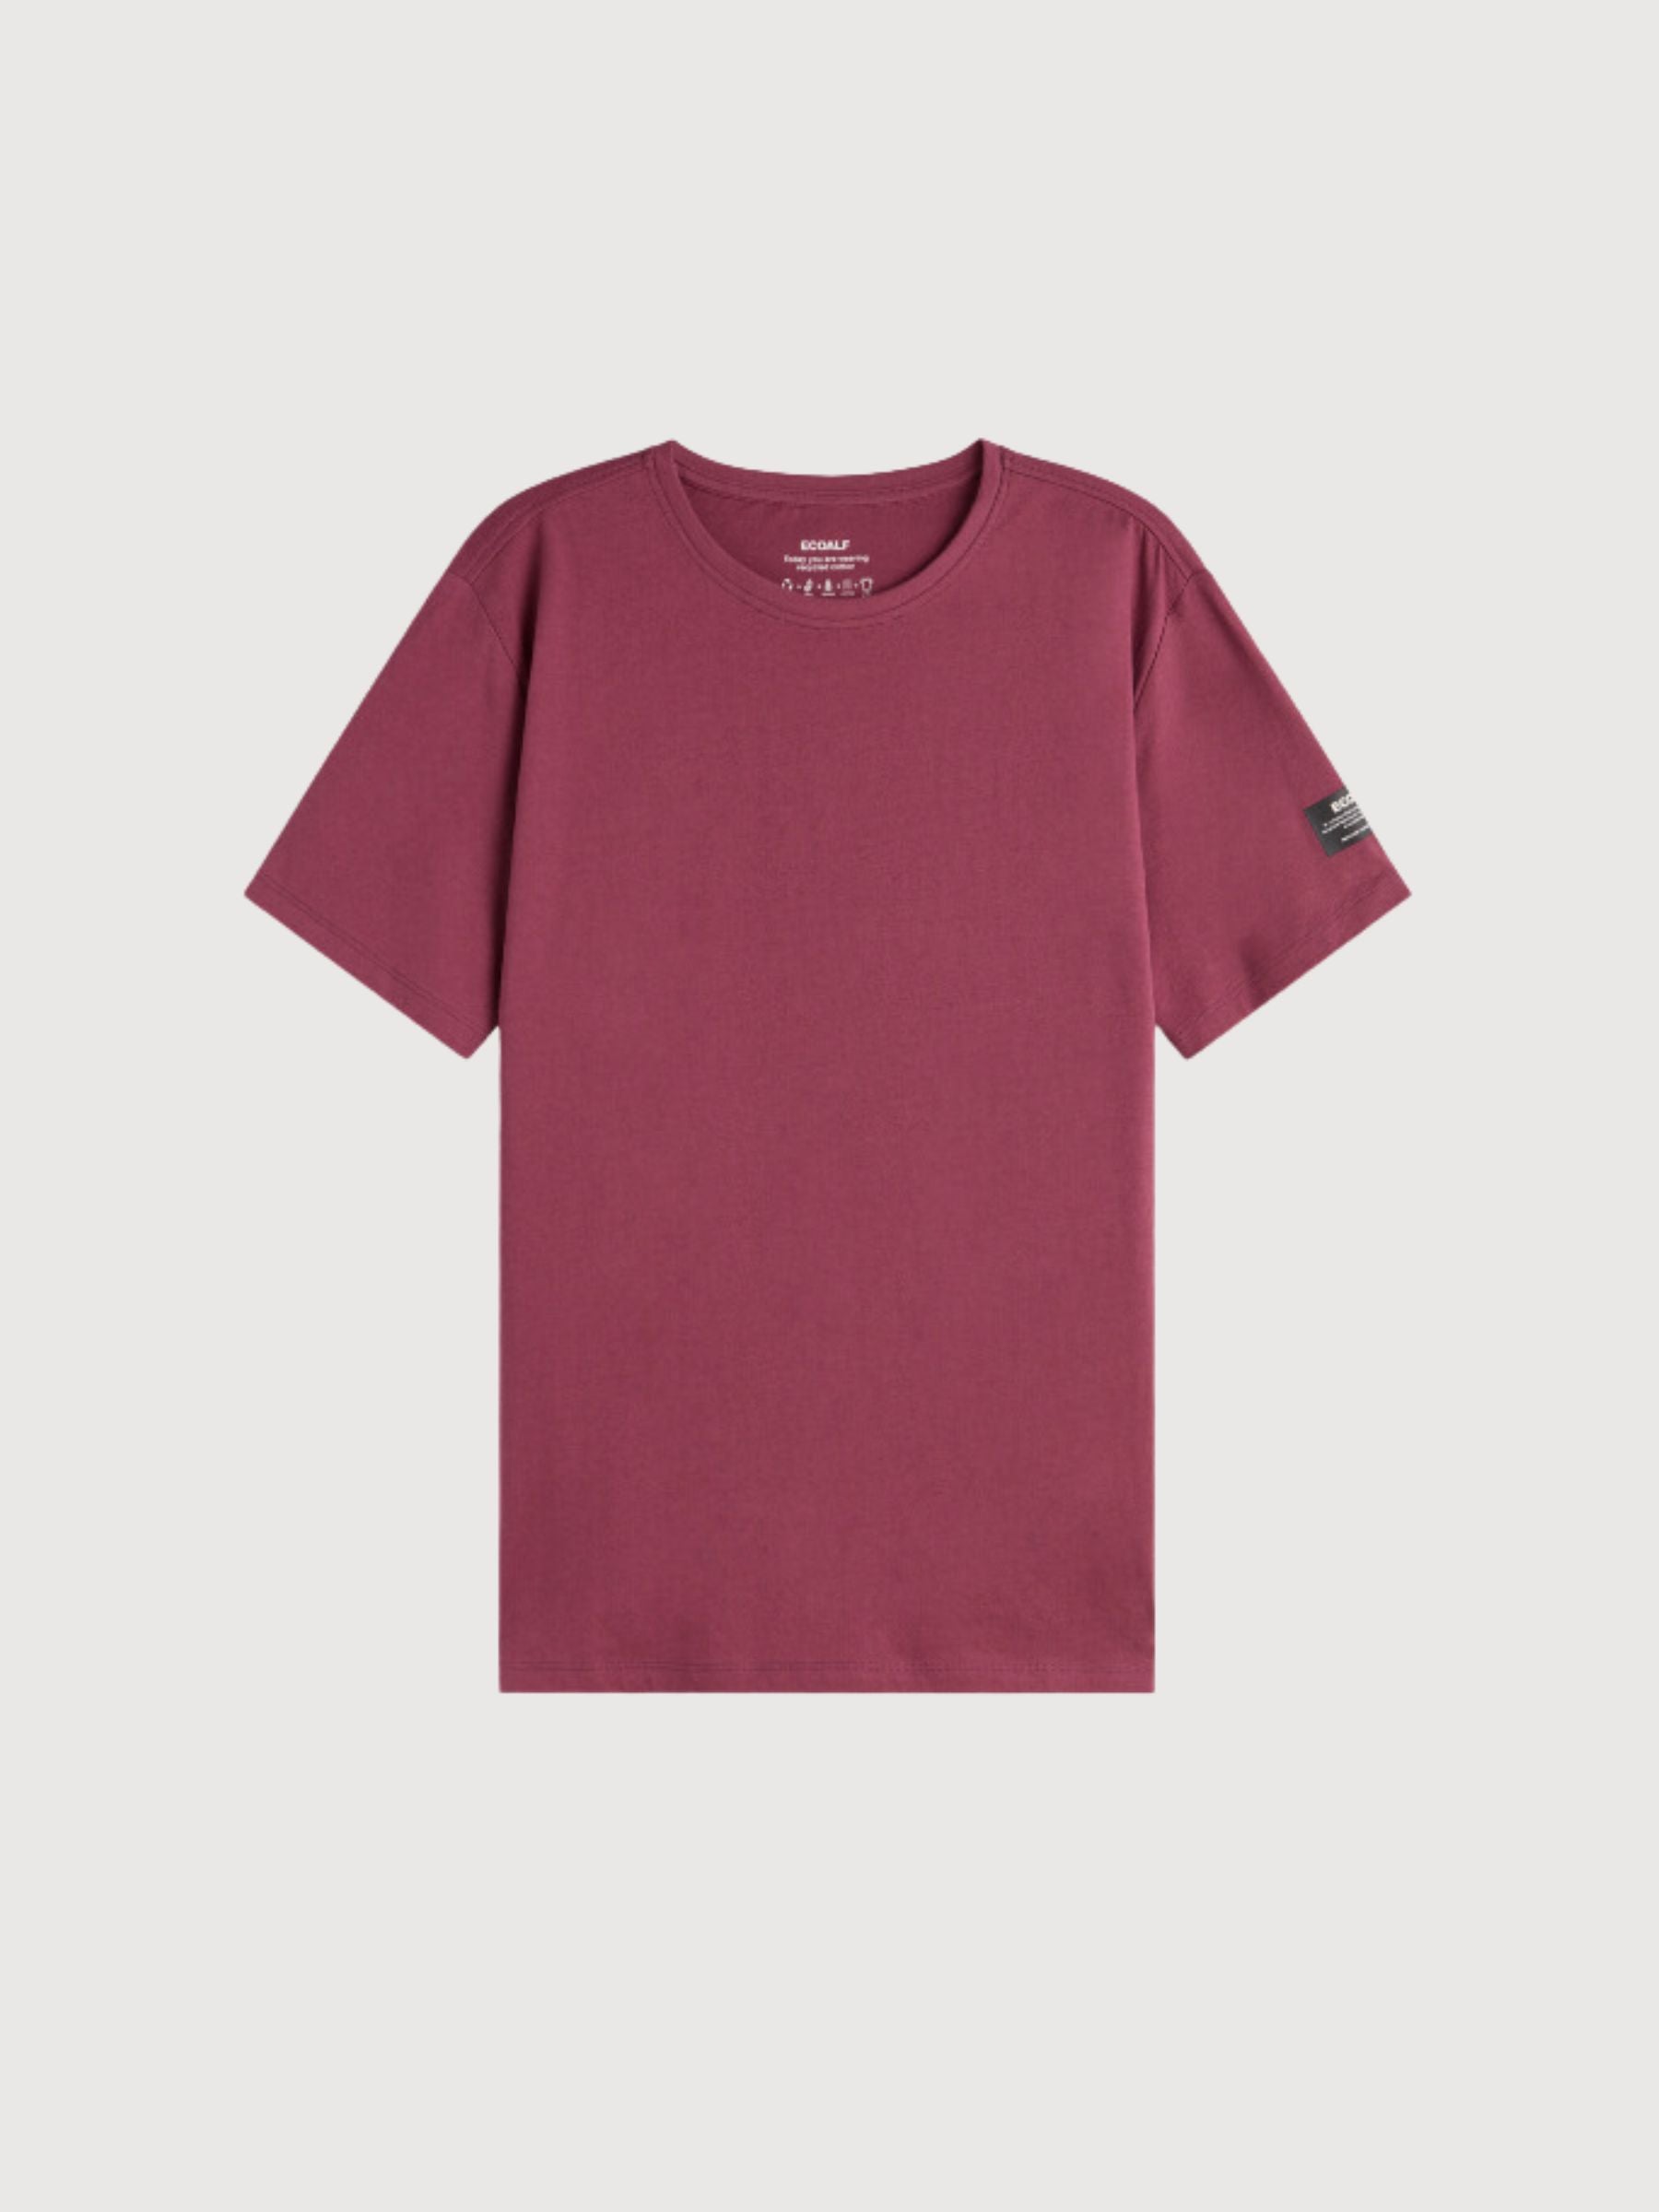 T-Shirt Mina Back in Recycled Cotton | Ecoalf